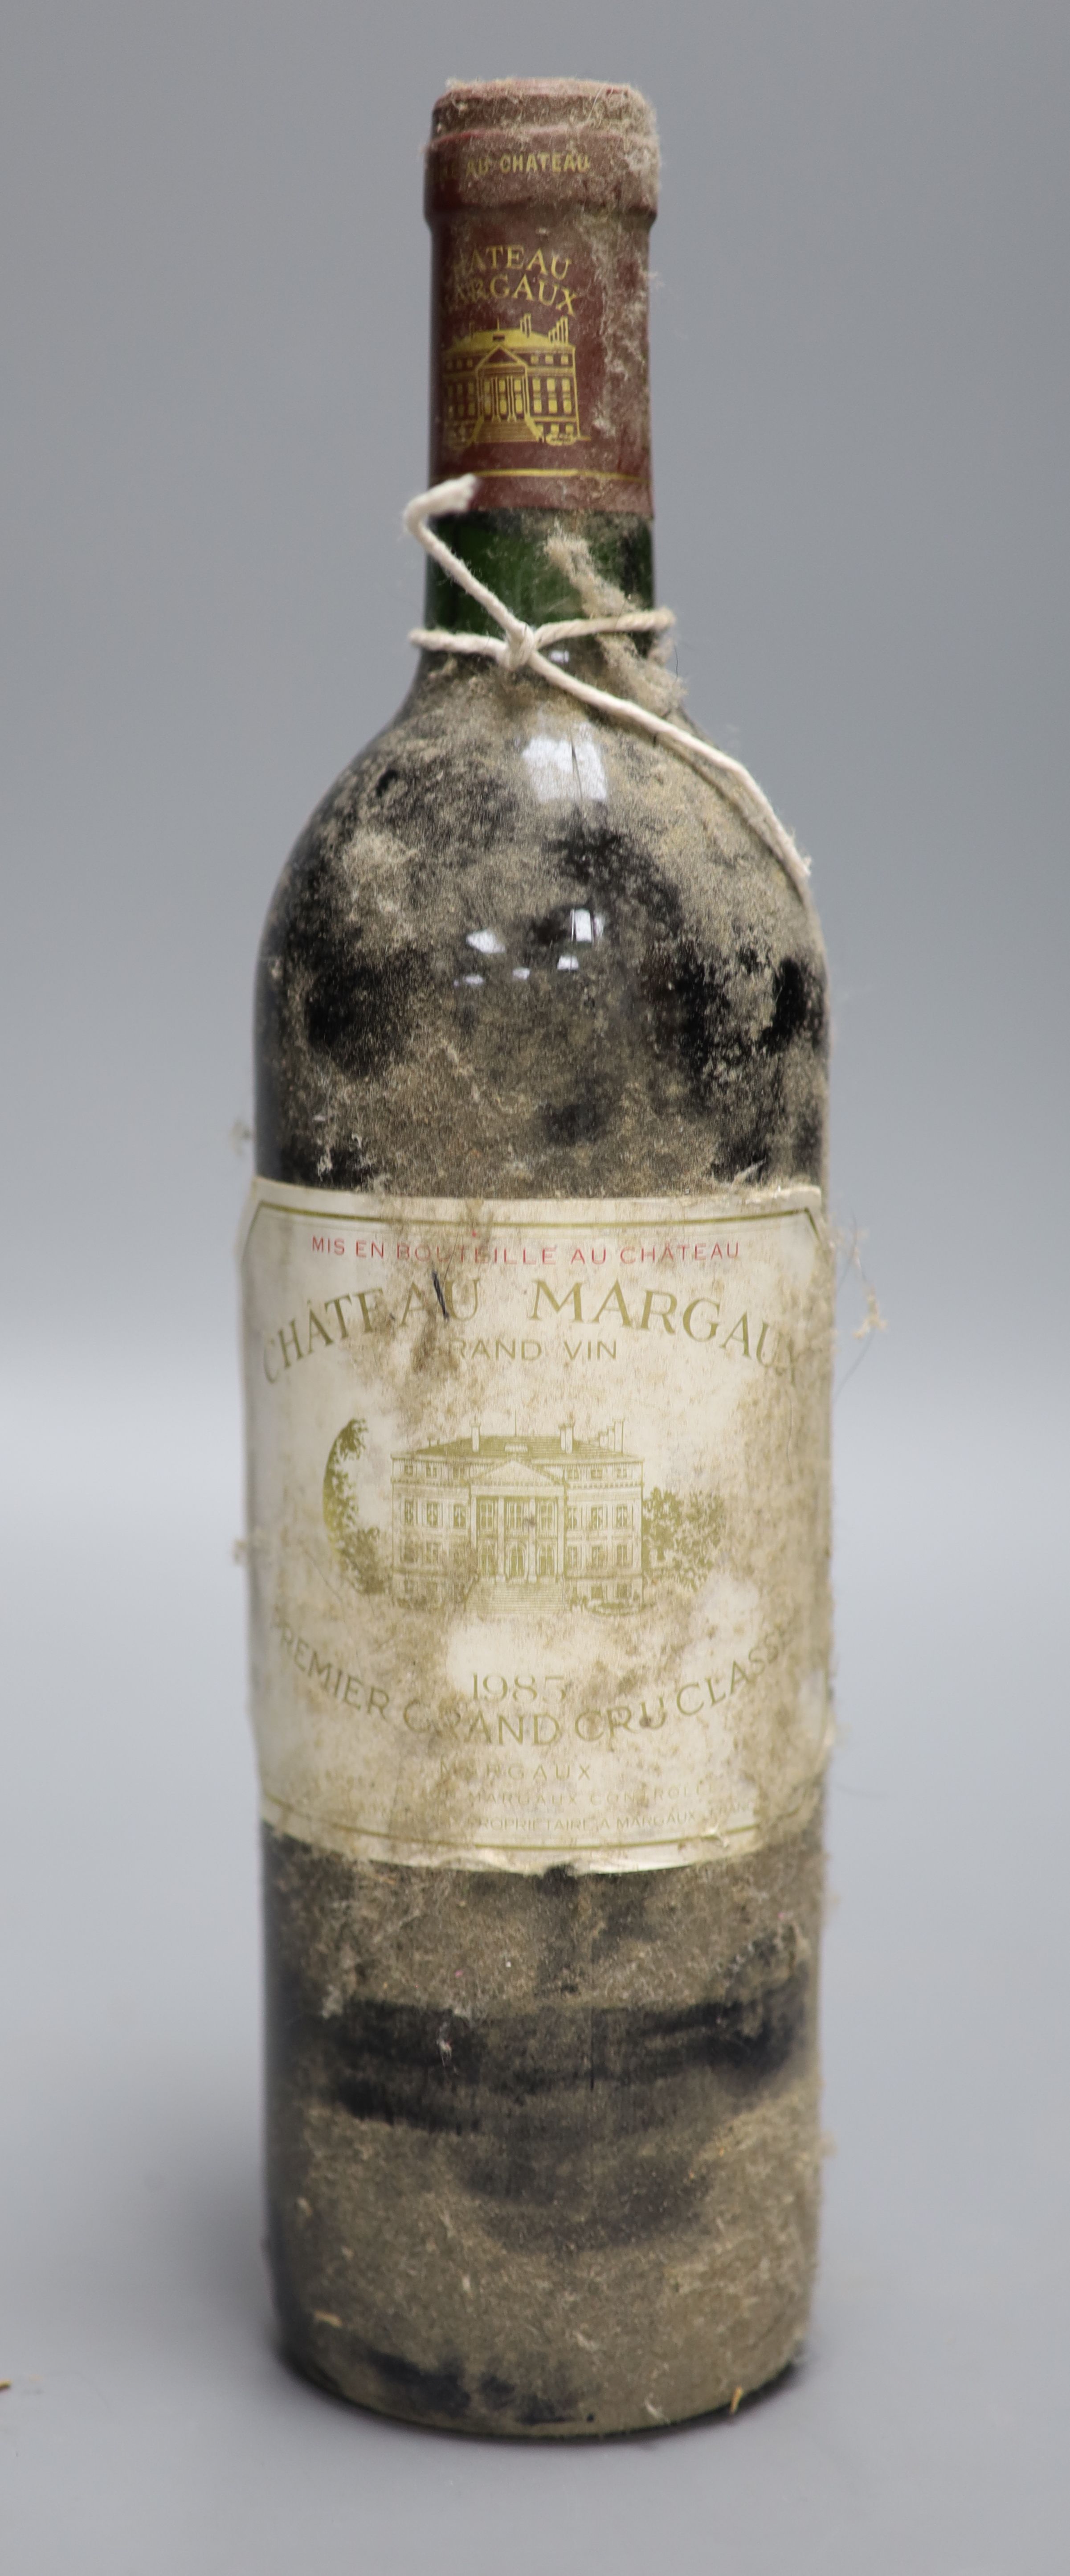 A 1985 bottle of Chateau Margaux